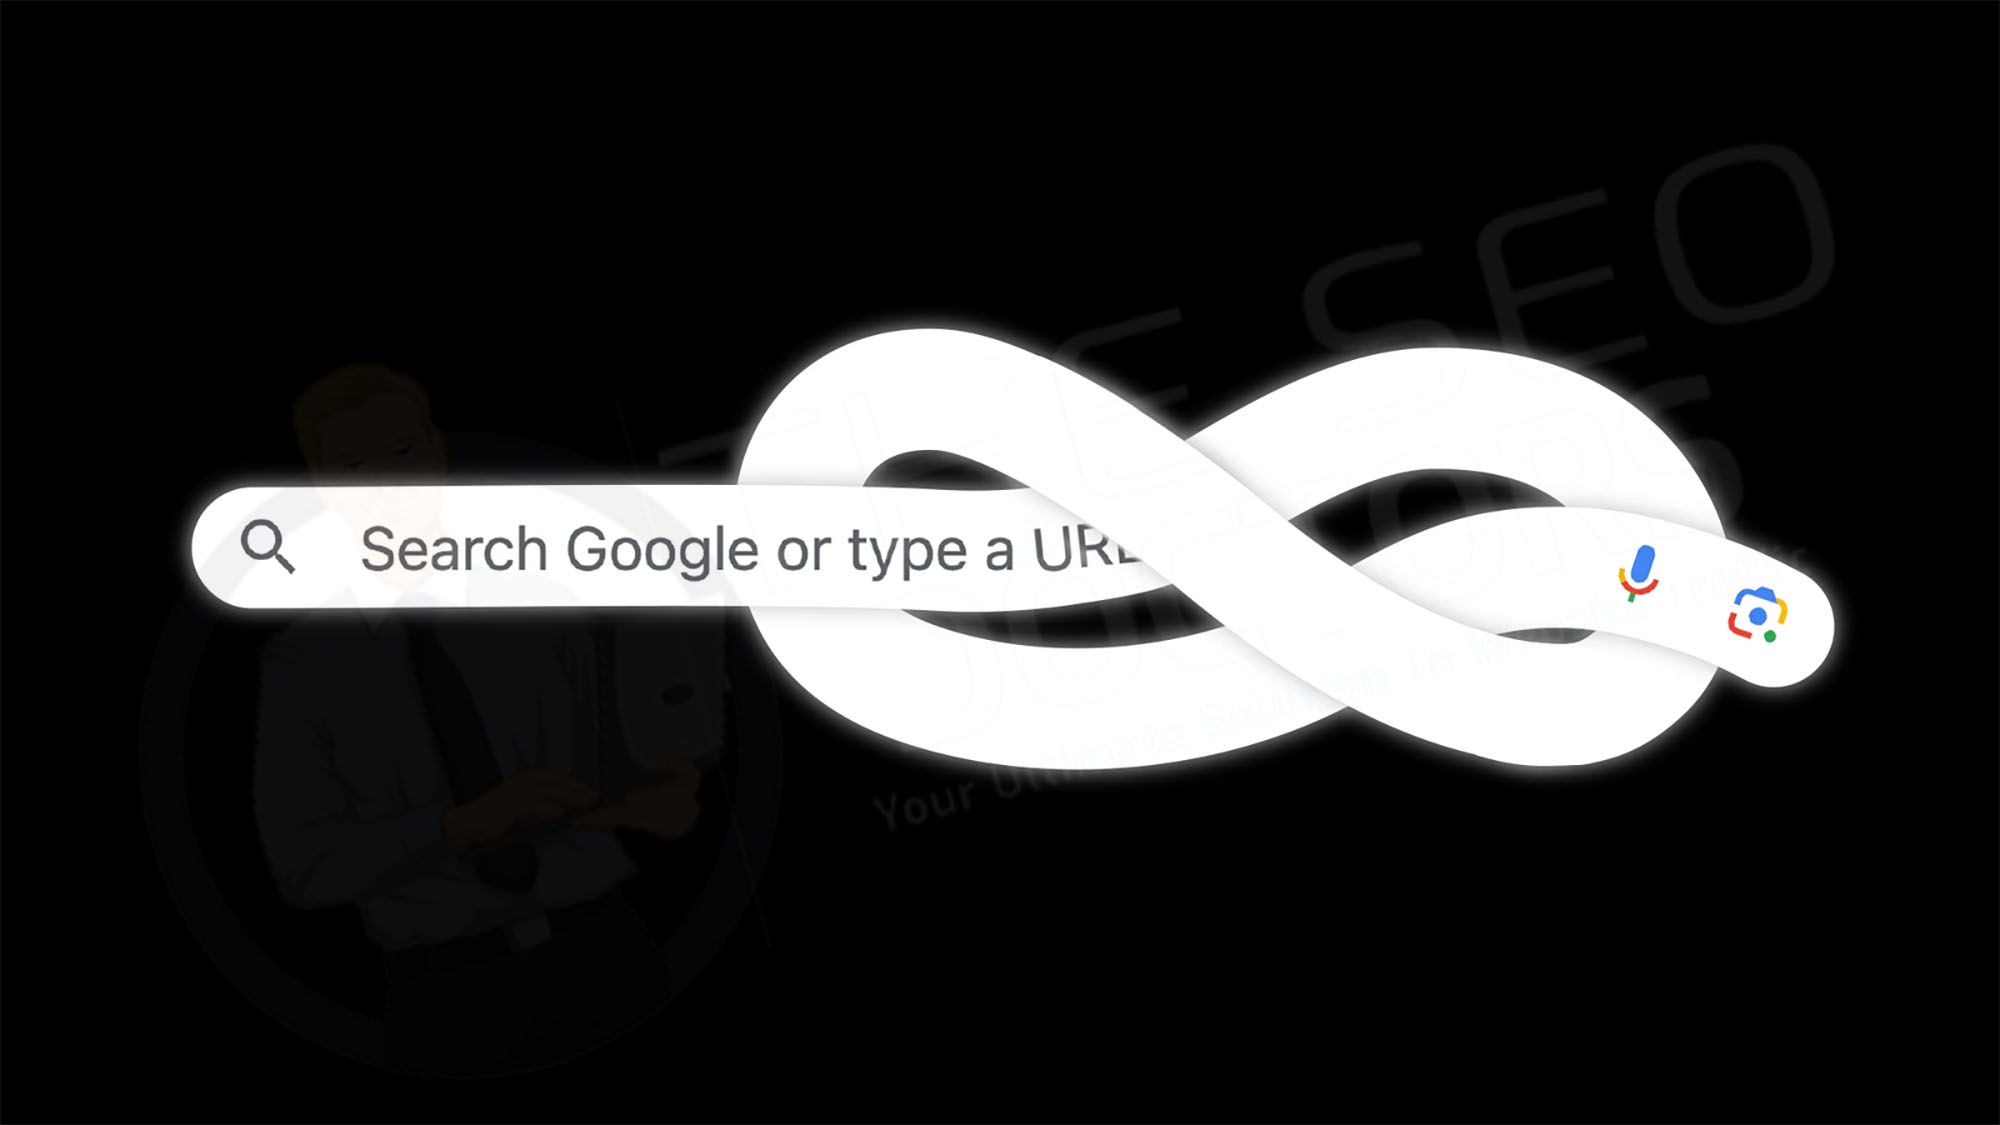 Google: SEO Is Not About Magic